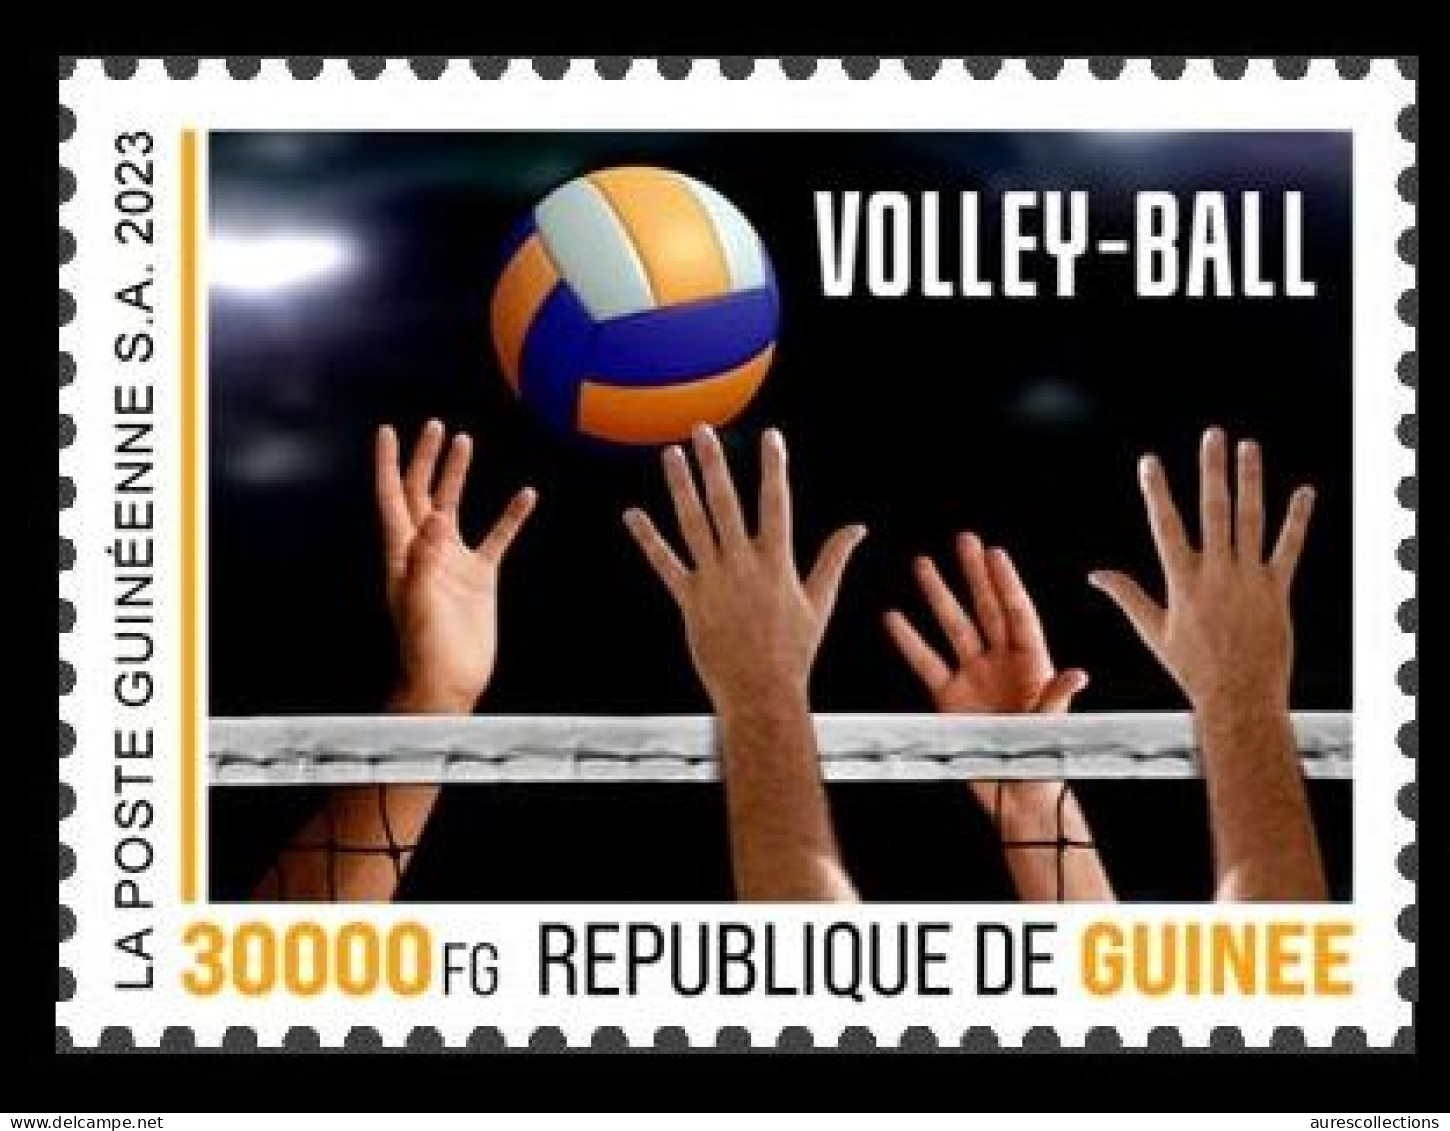 GUINEA 2023 STAMP 1V - OLYMPIC GAMES PARIS FRANCE 2024 - VOLLEY BALL VOLLEYBALL - MNH - Volley-Ball